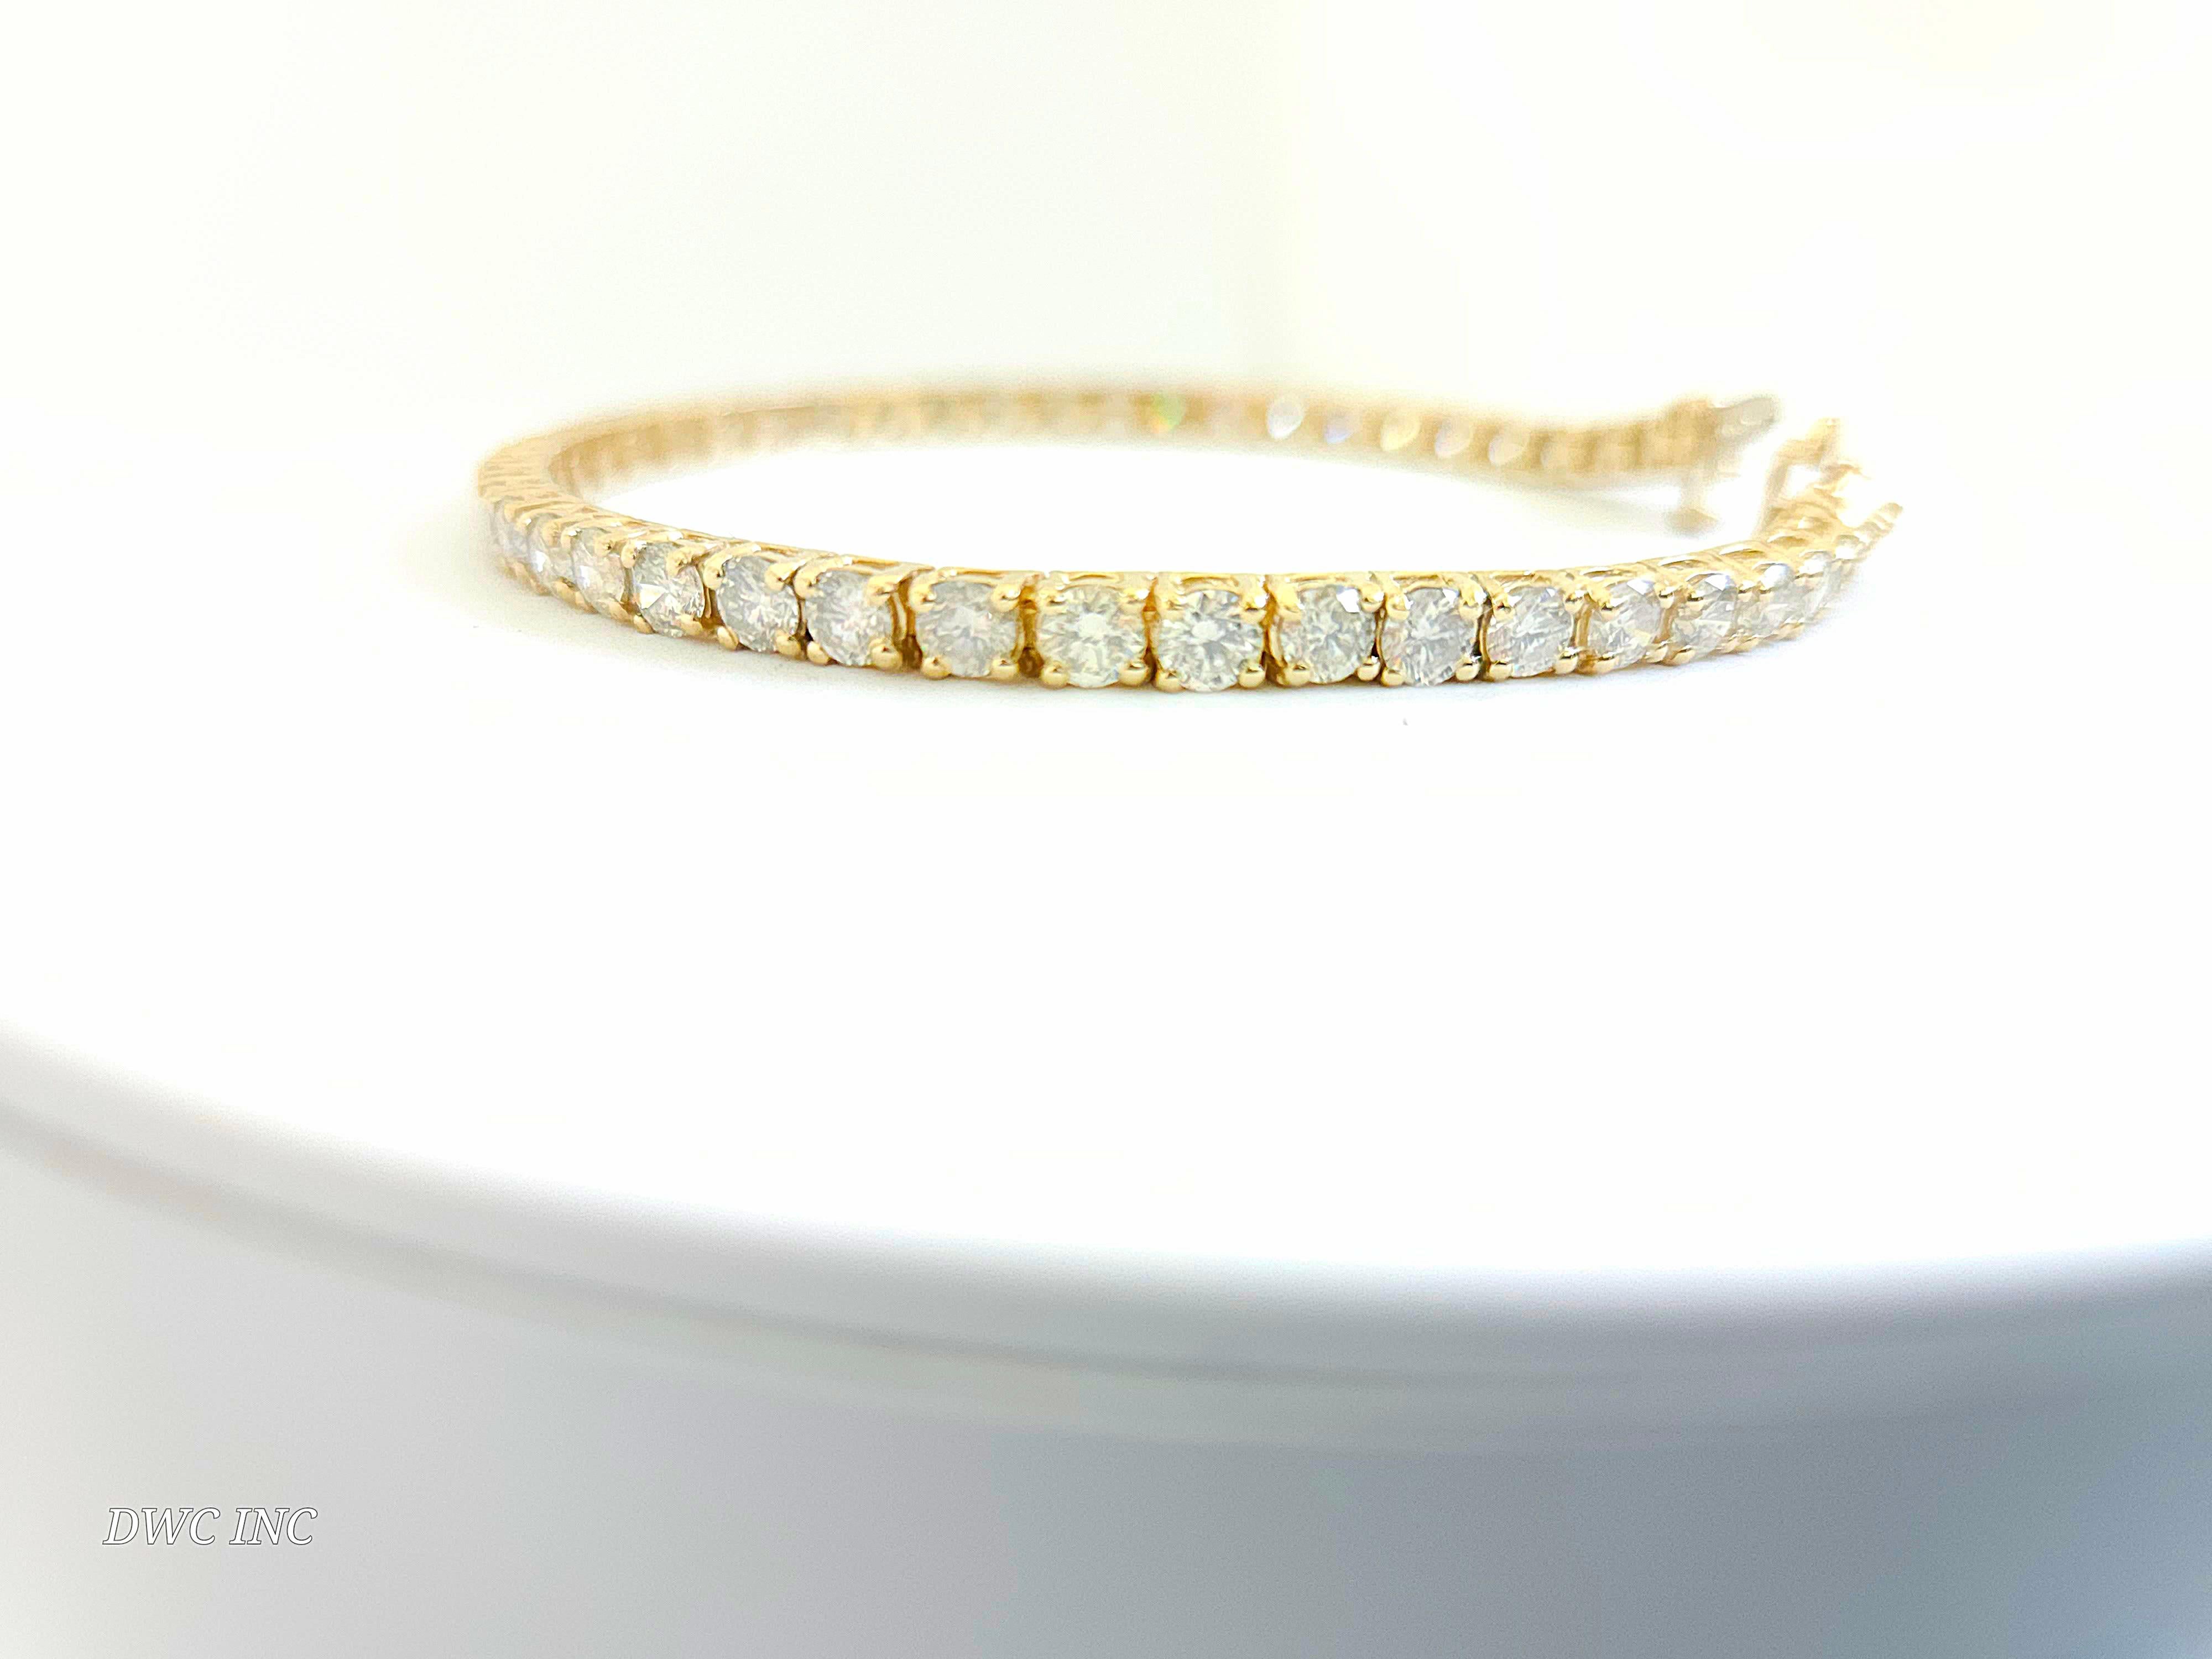 7.91 Carat Round Brilliant Cut Diamond Tennis Bracelet 14 Karat Yellow Gold In New Condition For Sale In Great Neck, NY